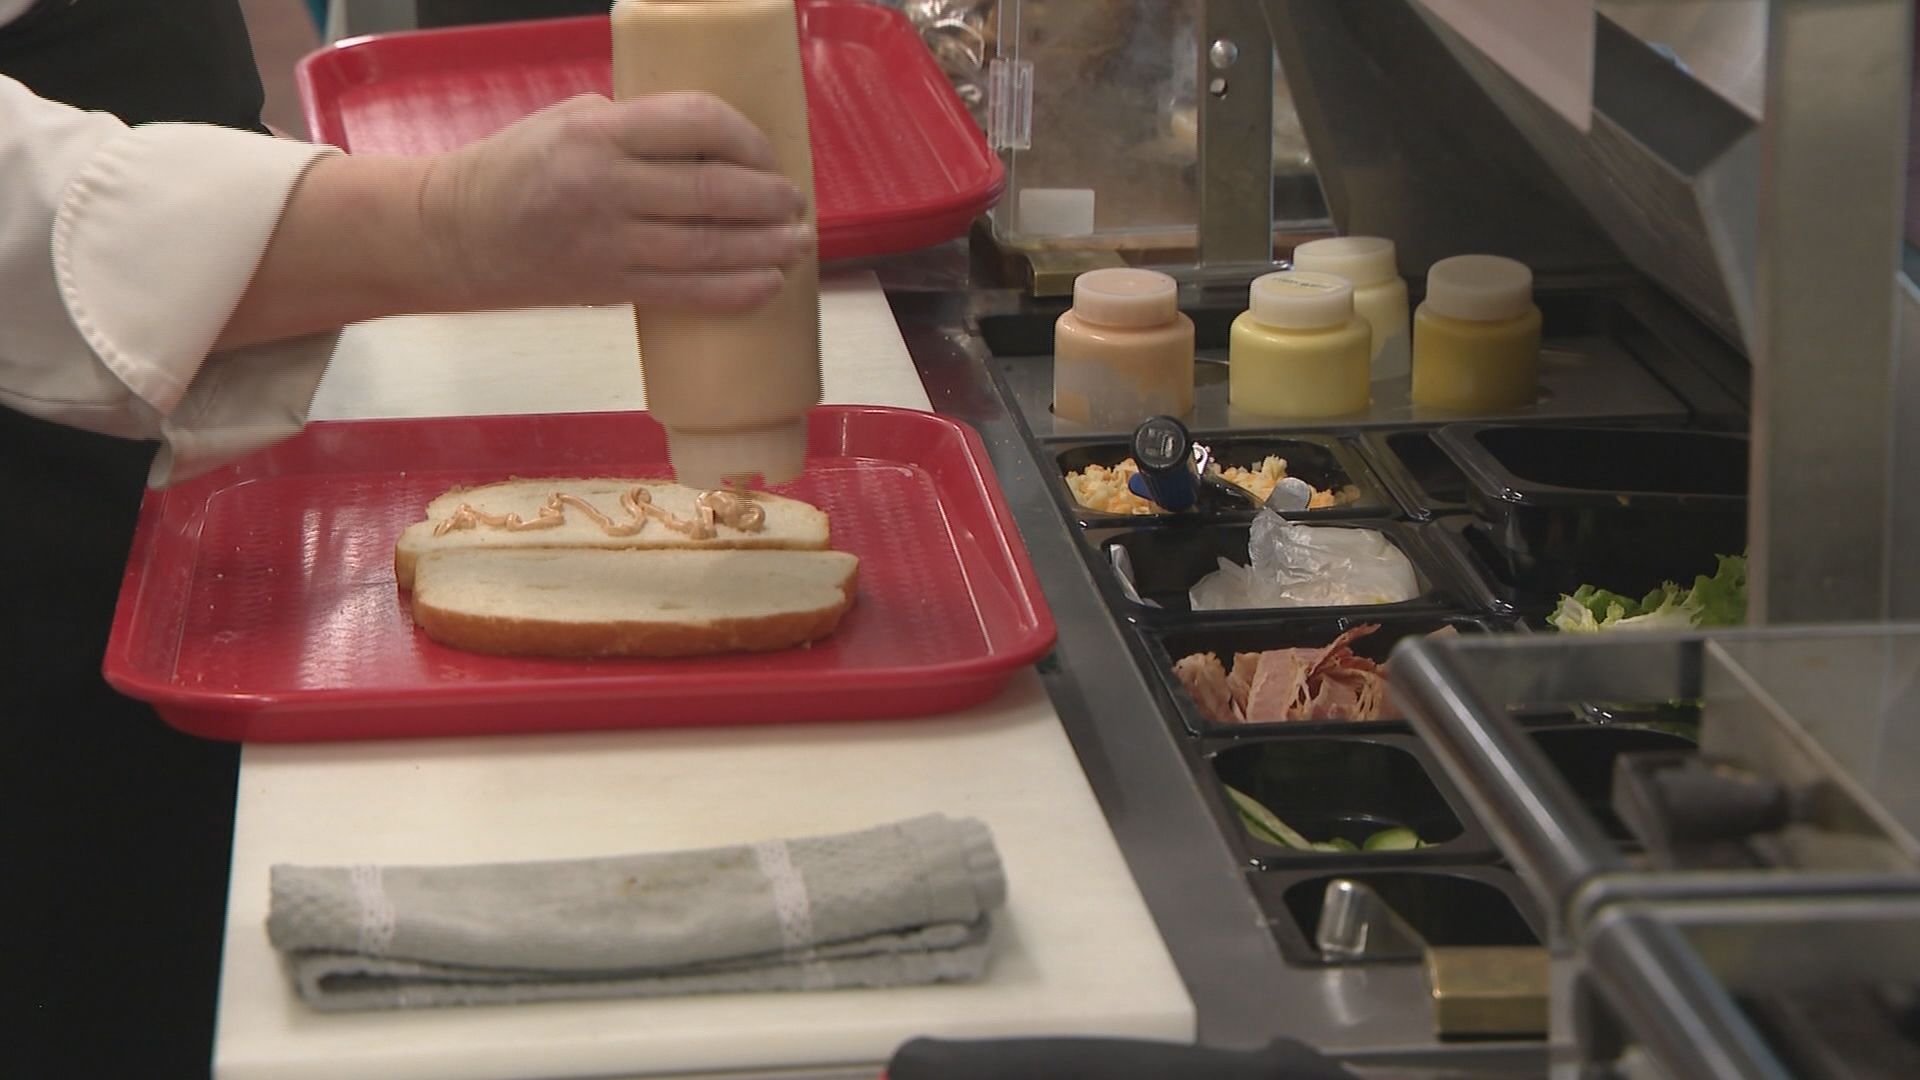 A sandwich is being made on a bun on a tray. Other sauces and ingredients are laid out nearby.